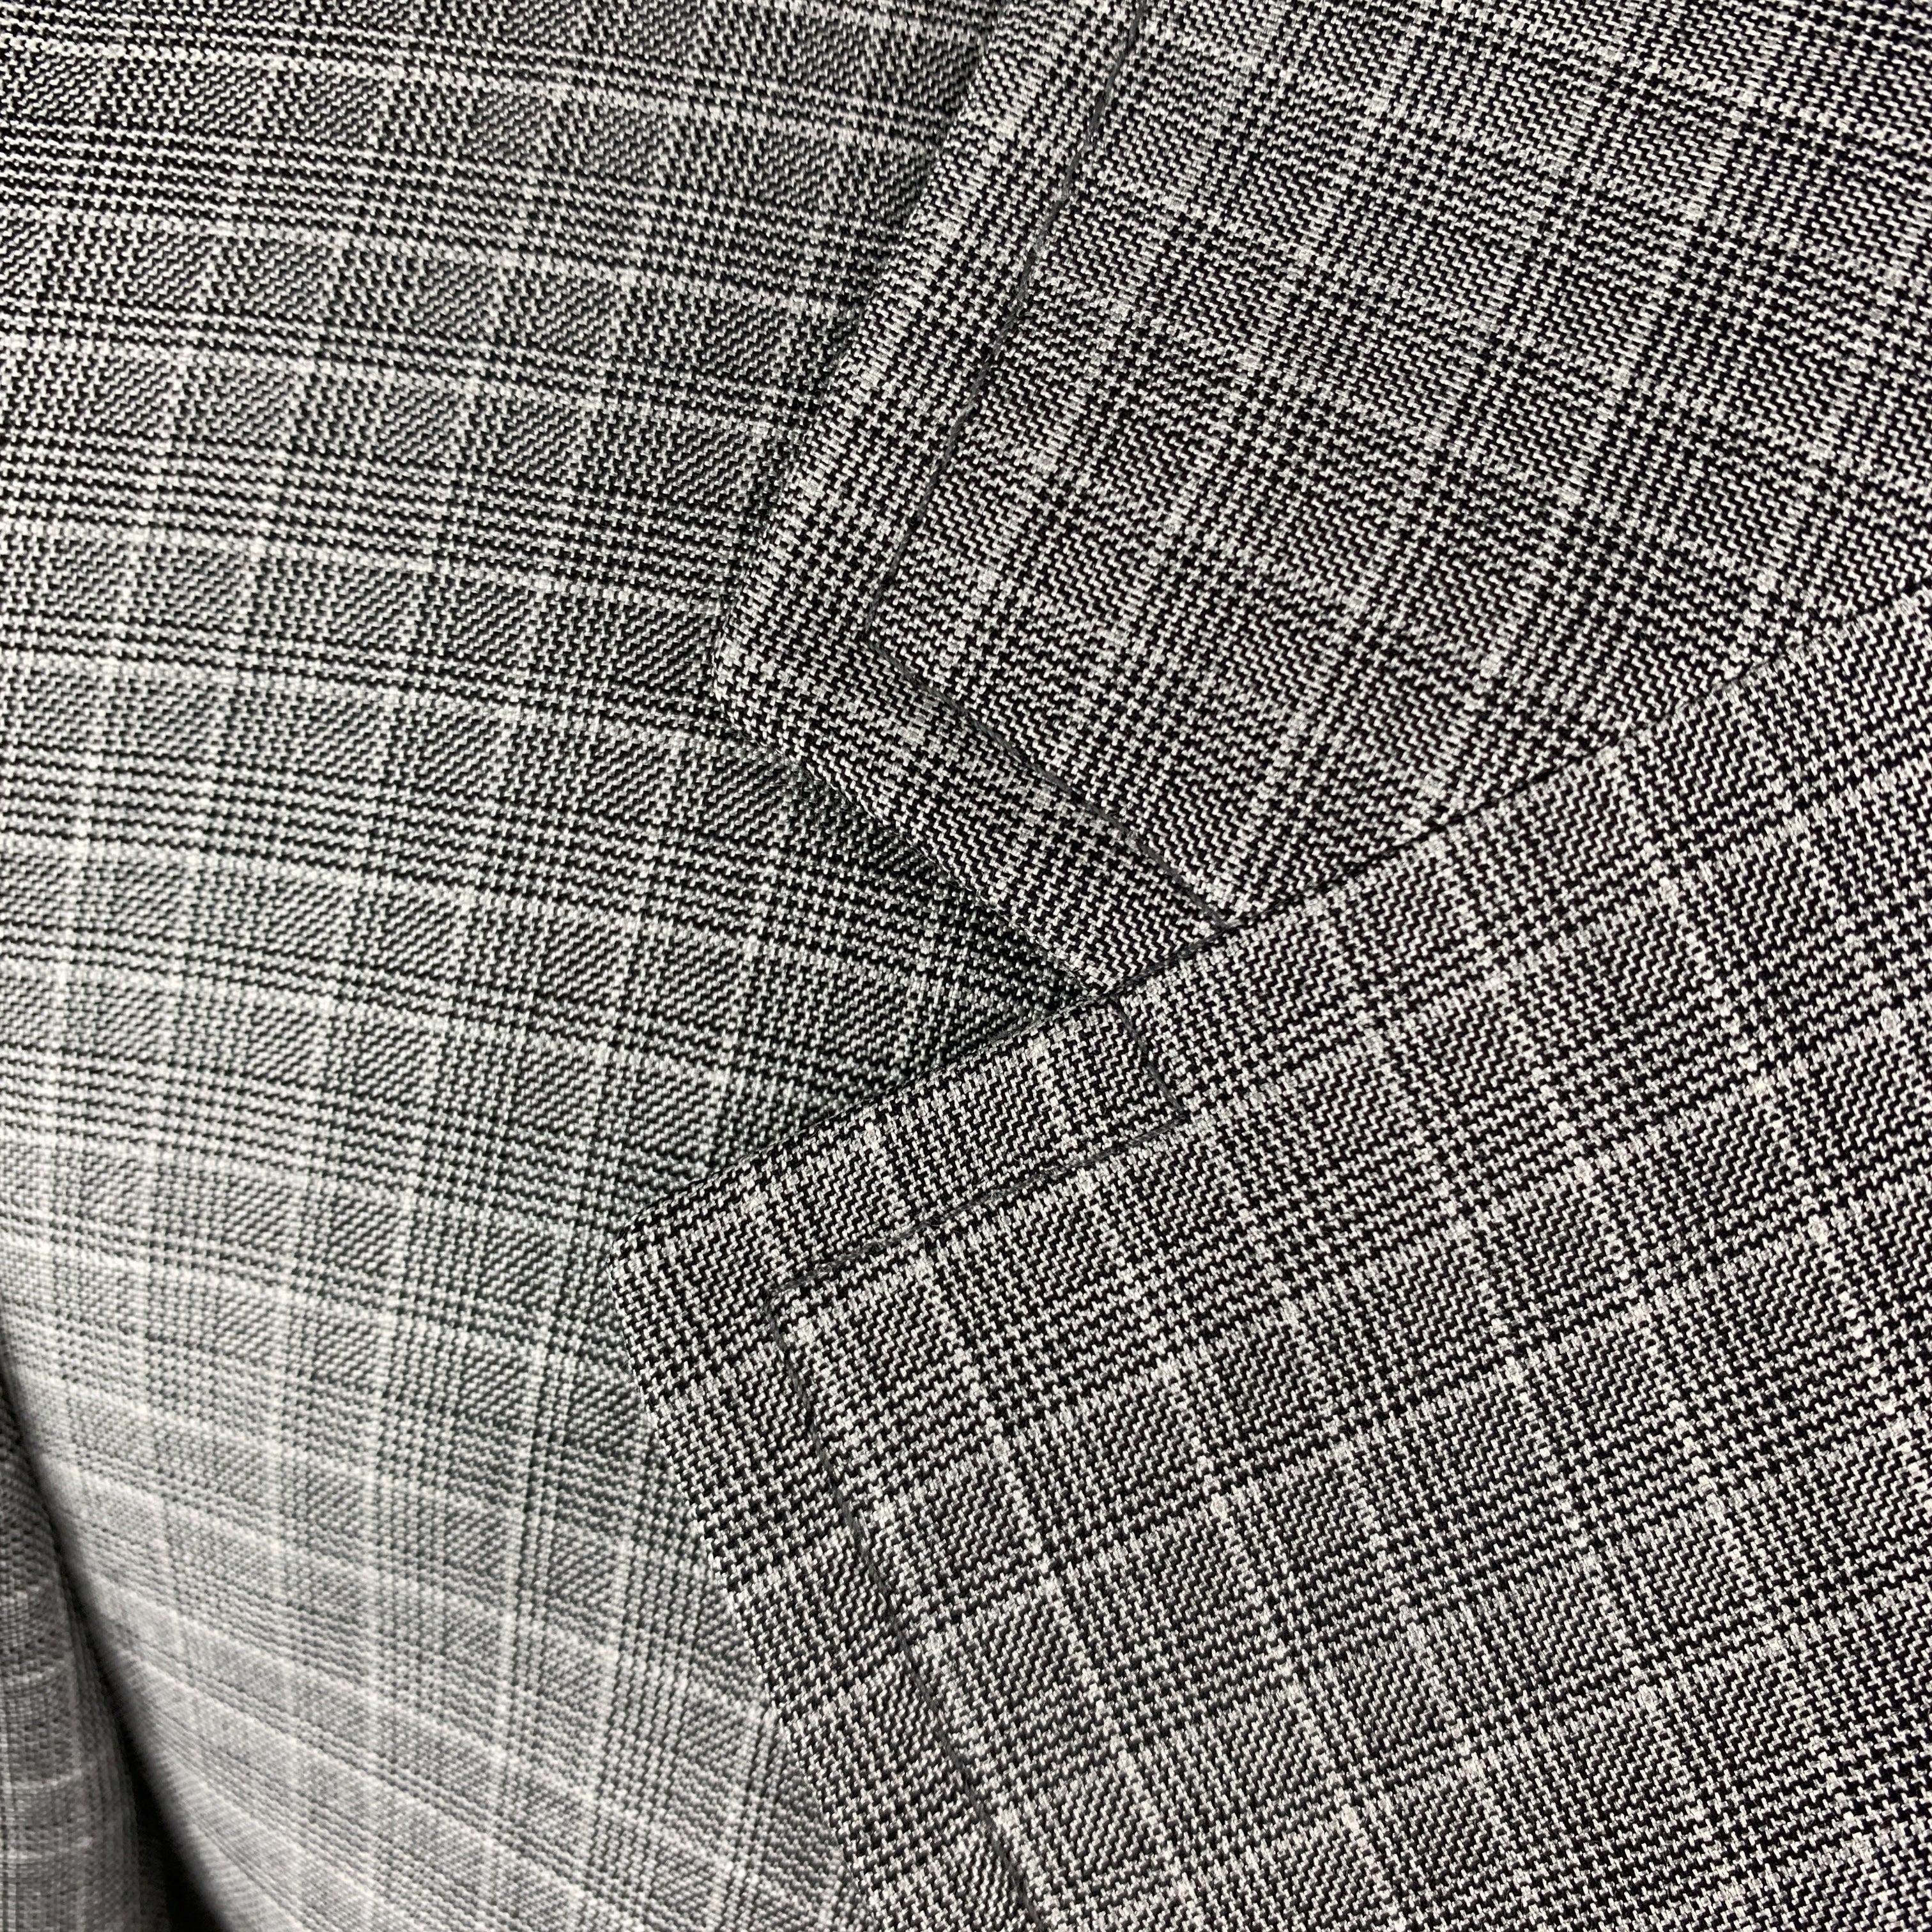 PRADA Size 38 Regular Plaid Grey Wool / Silk Notch Lapel Sport Coat In Excellent Condition For Sale In San Francisco, CA